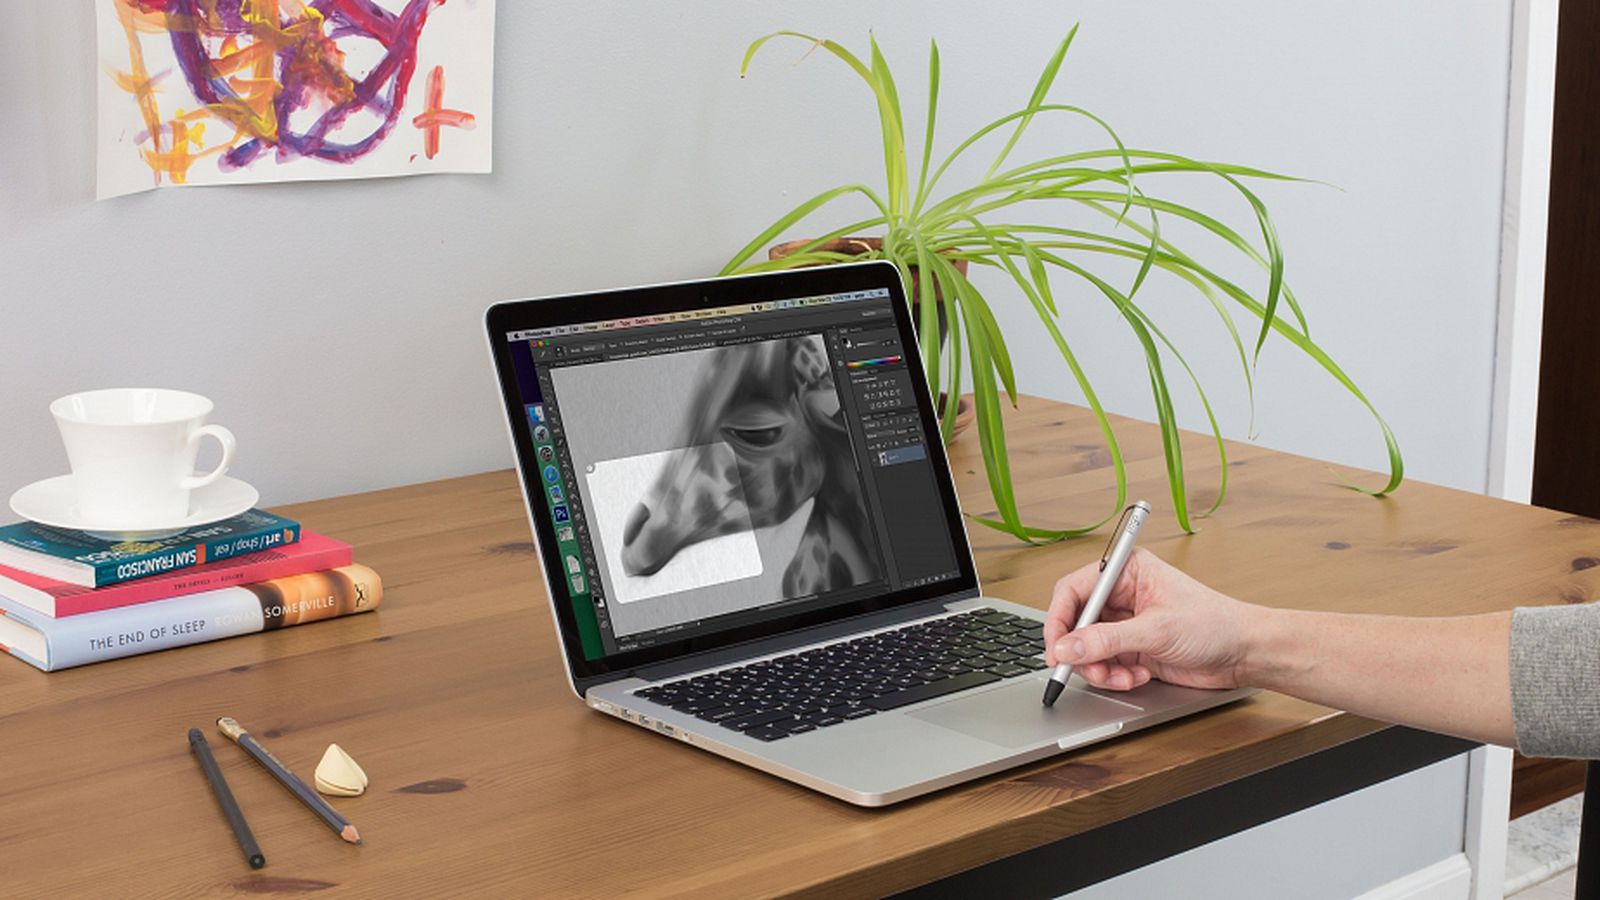 Inklet uses Apple's new trackpad to turn MacBooks into